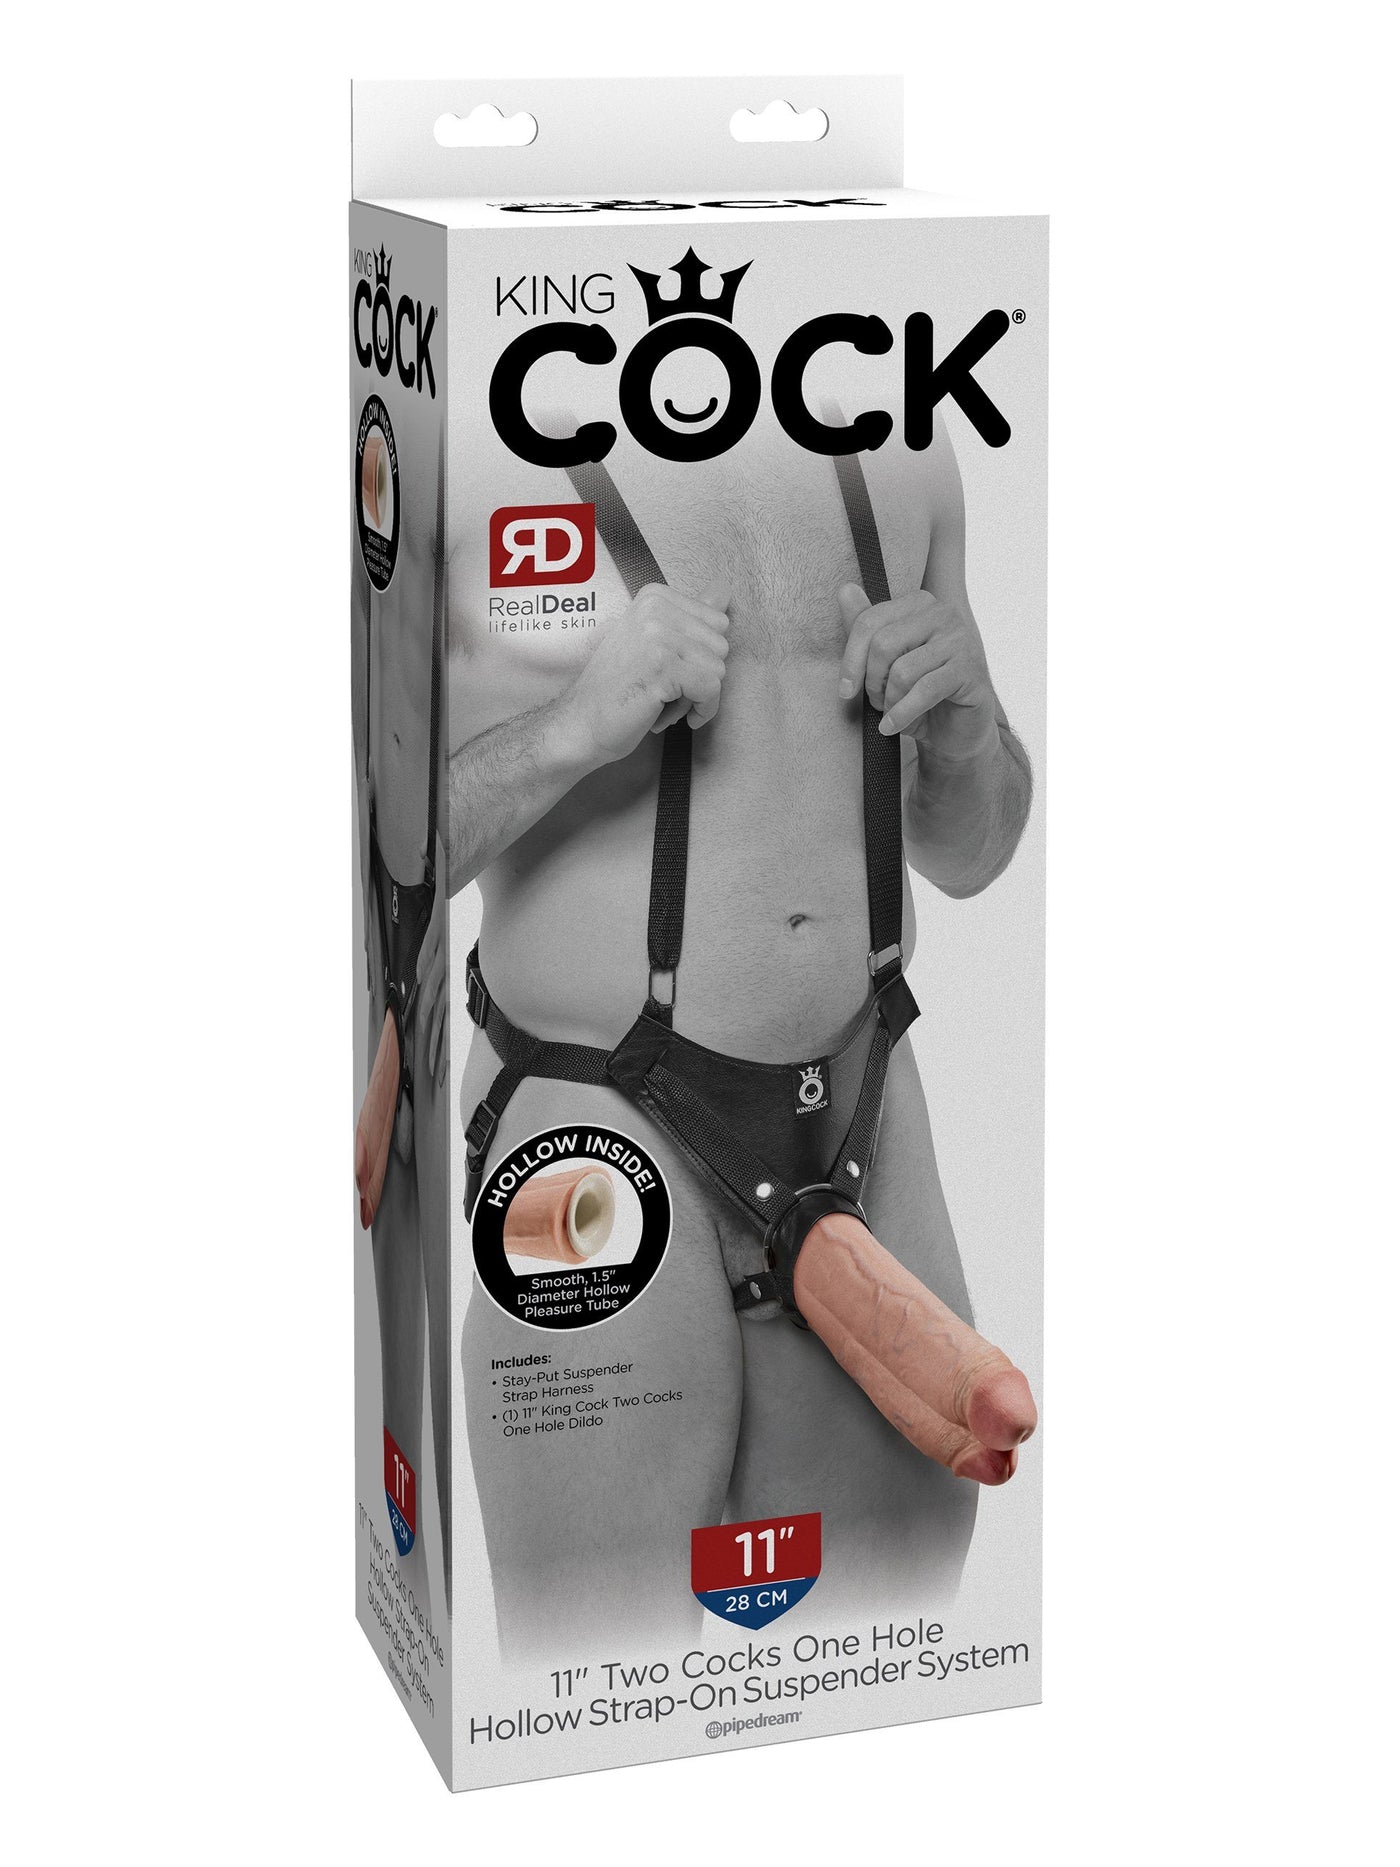 King Cock Two Cocks One Hole Hollow Harness More Toys Pipedream Products 